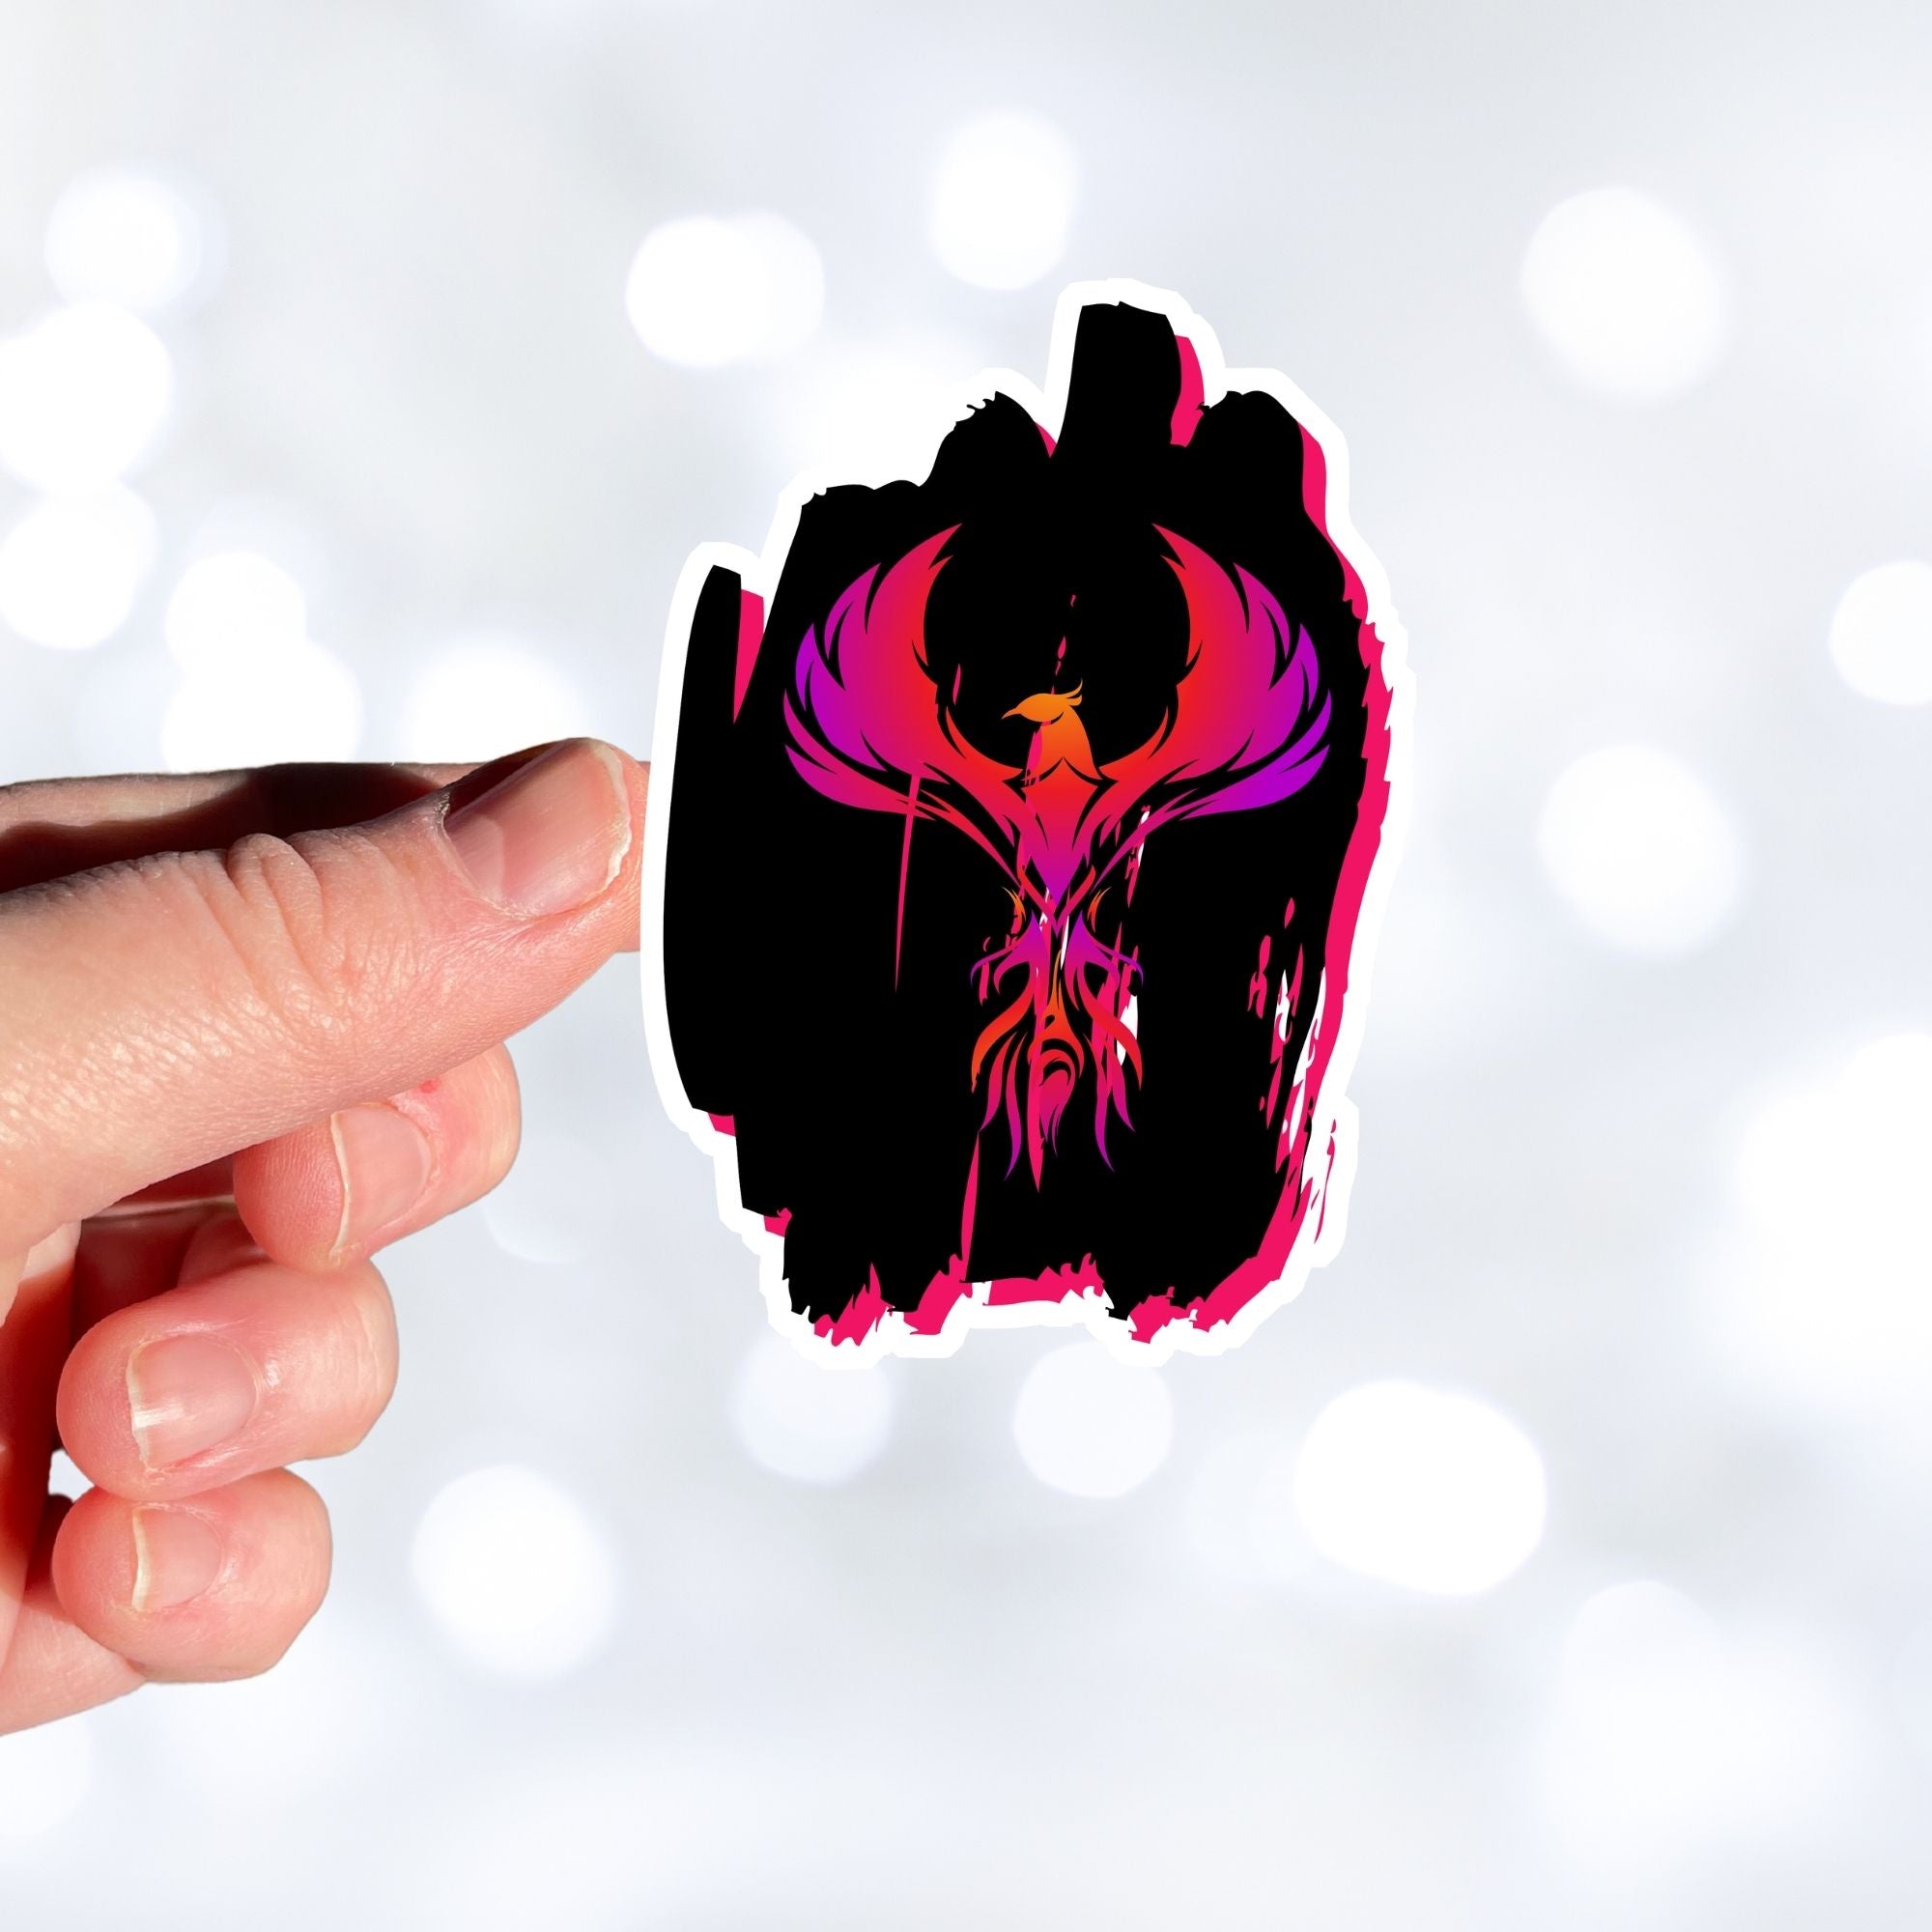 Phoenix rising - this individual die-cut sticker features a purple, red, and orange phoenix on a black background. This image shows a hand holding the Phoenix on Black sticker.